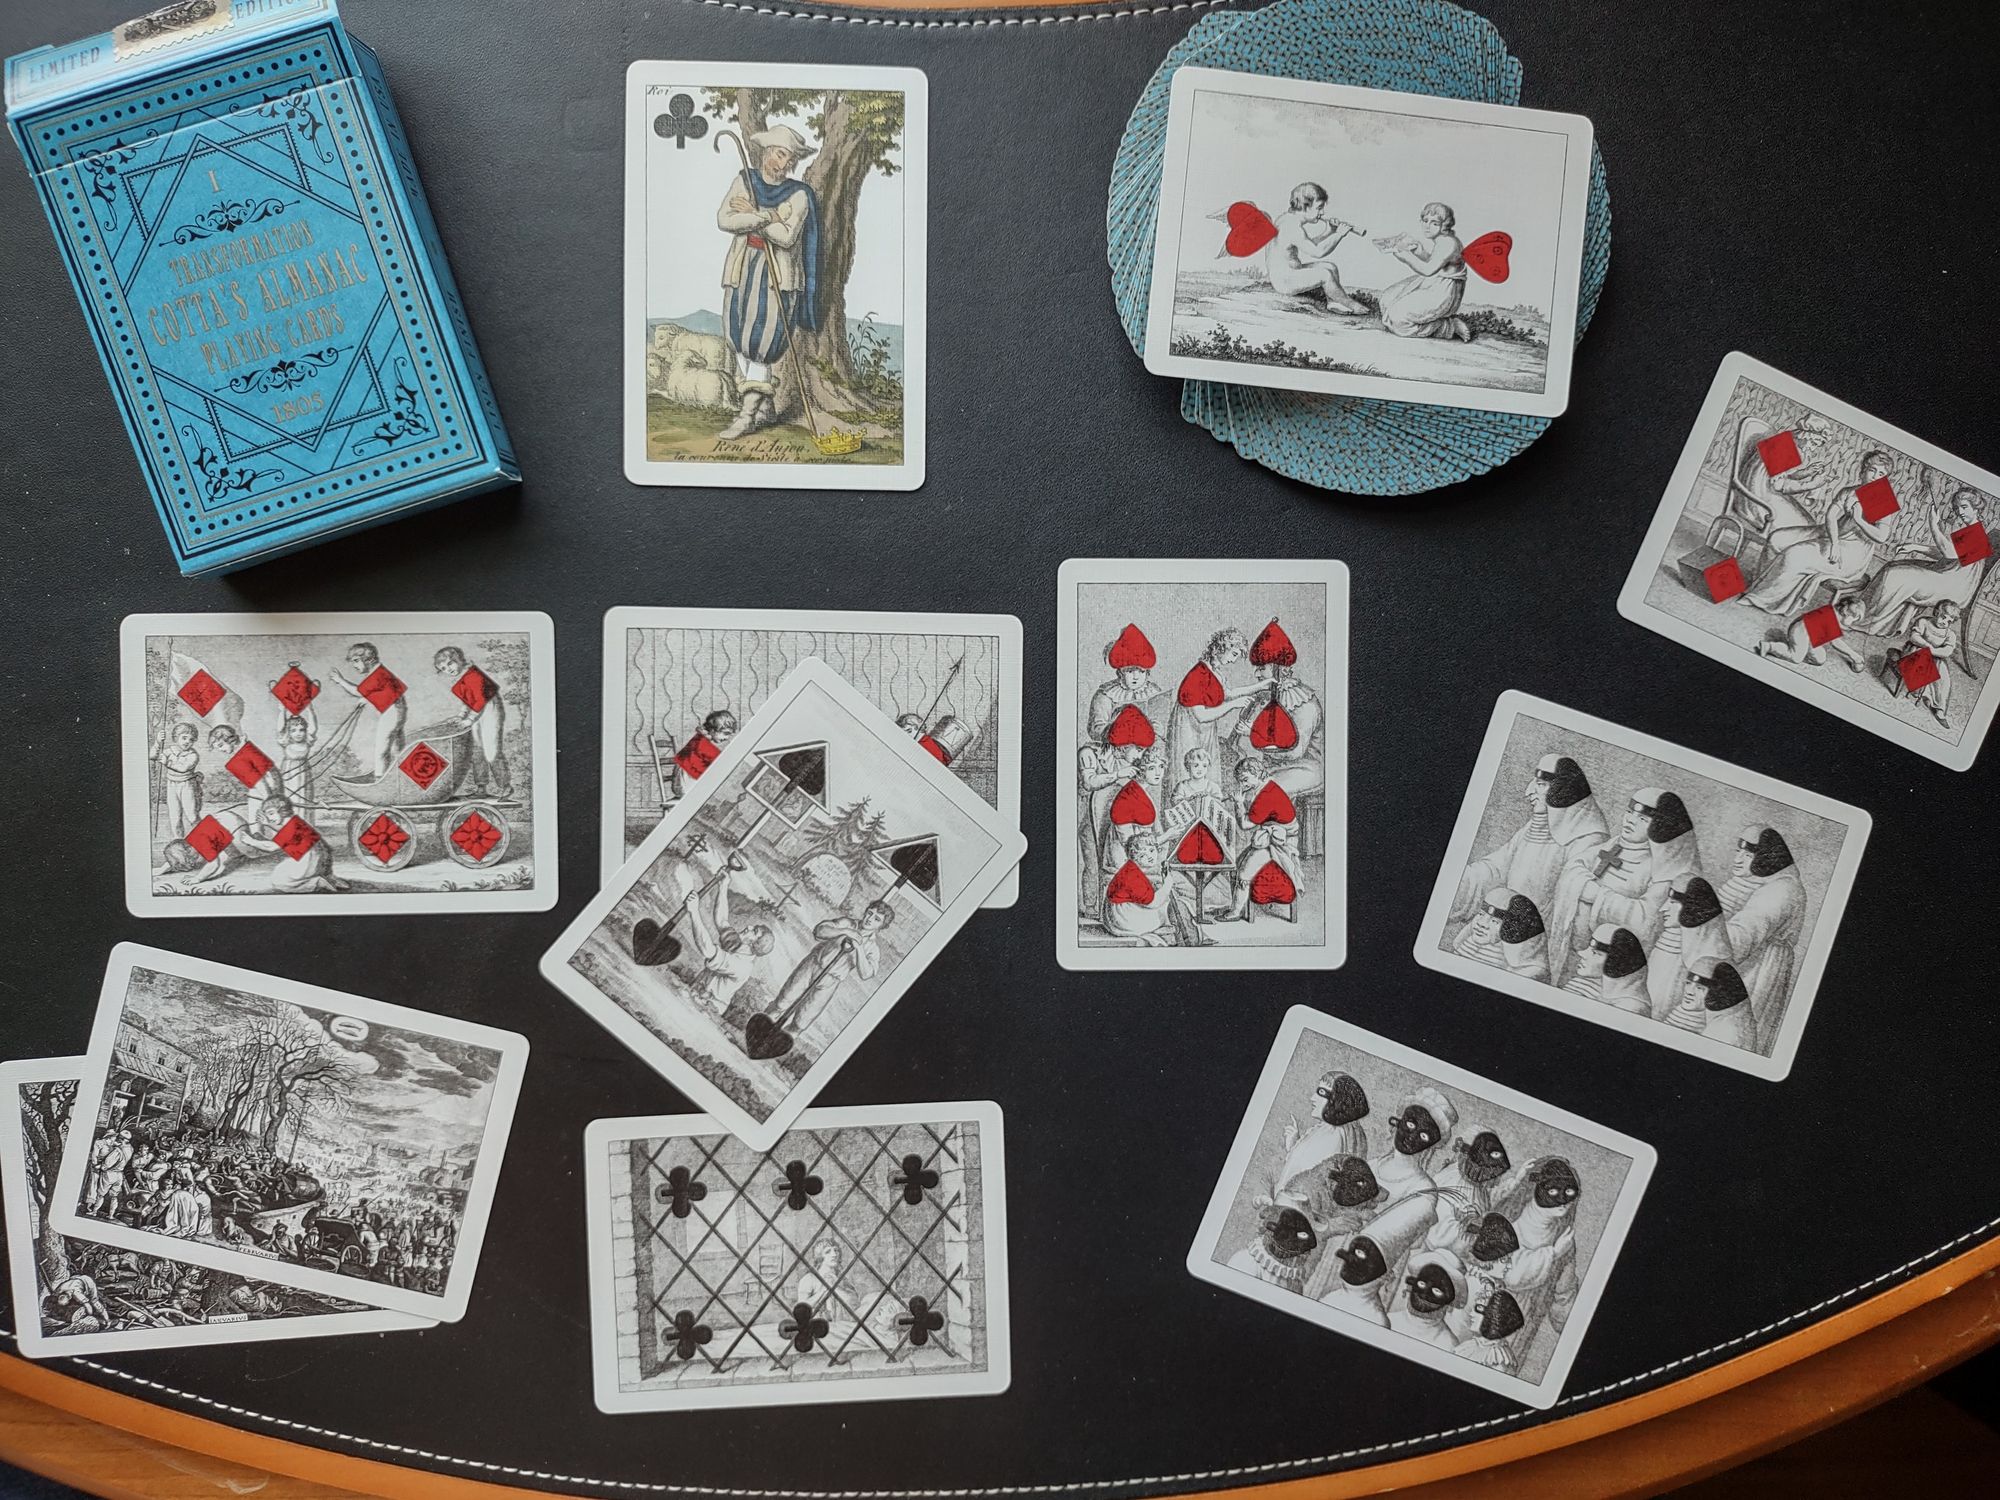 2 of hearts. From the Cotta's Almanac reproduction deck.